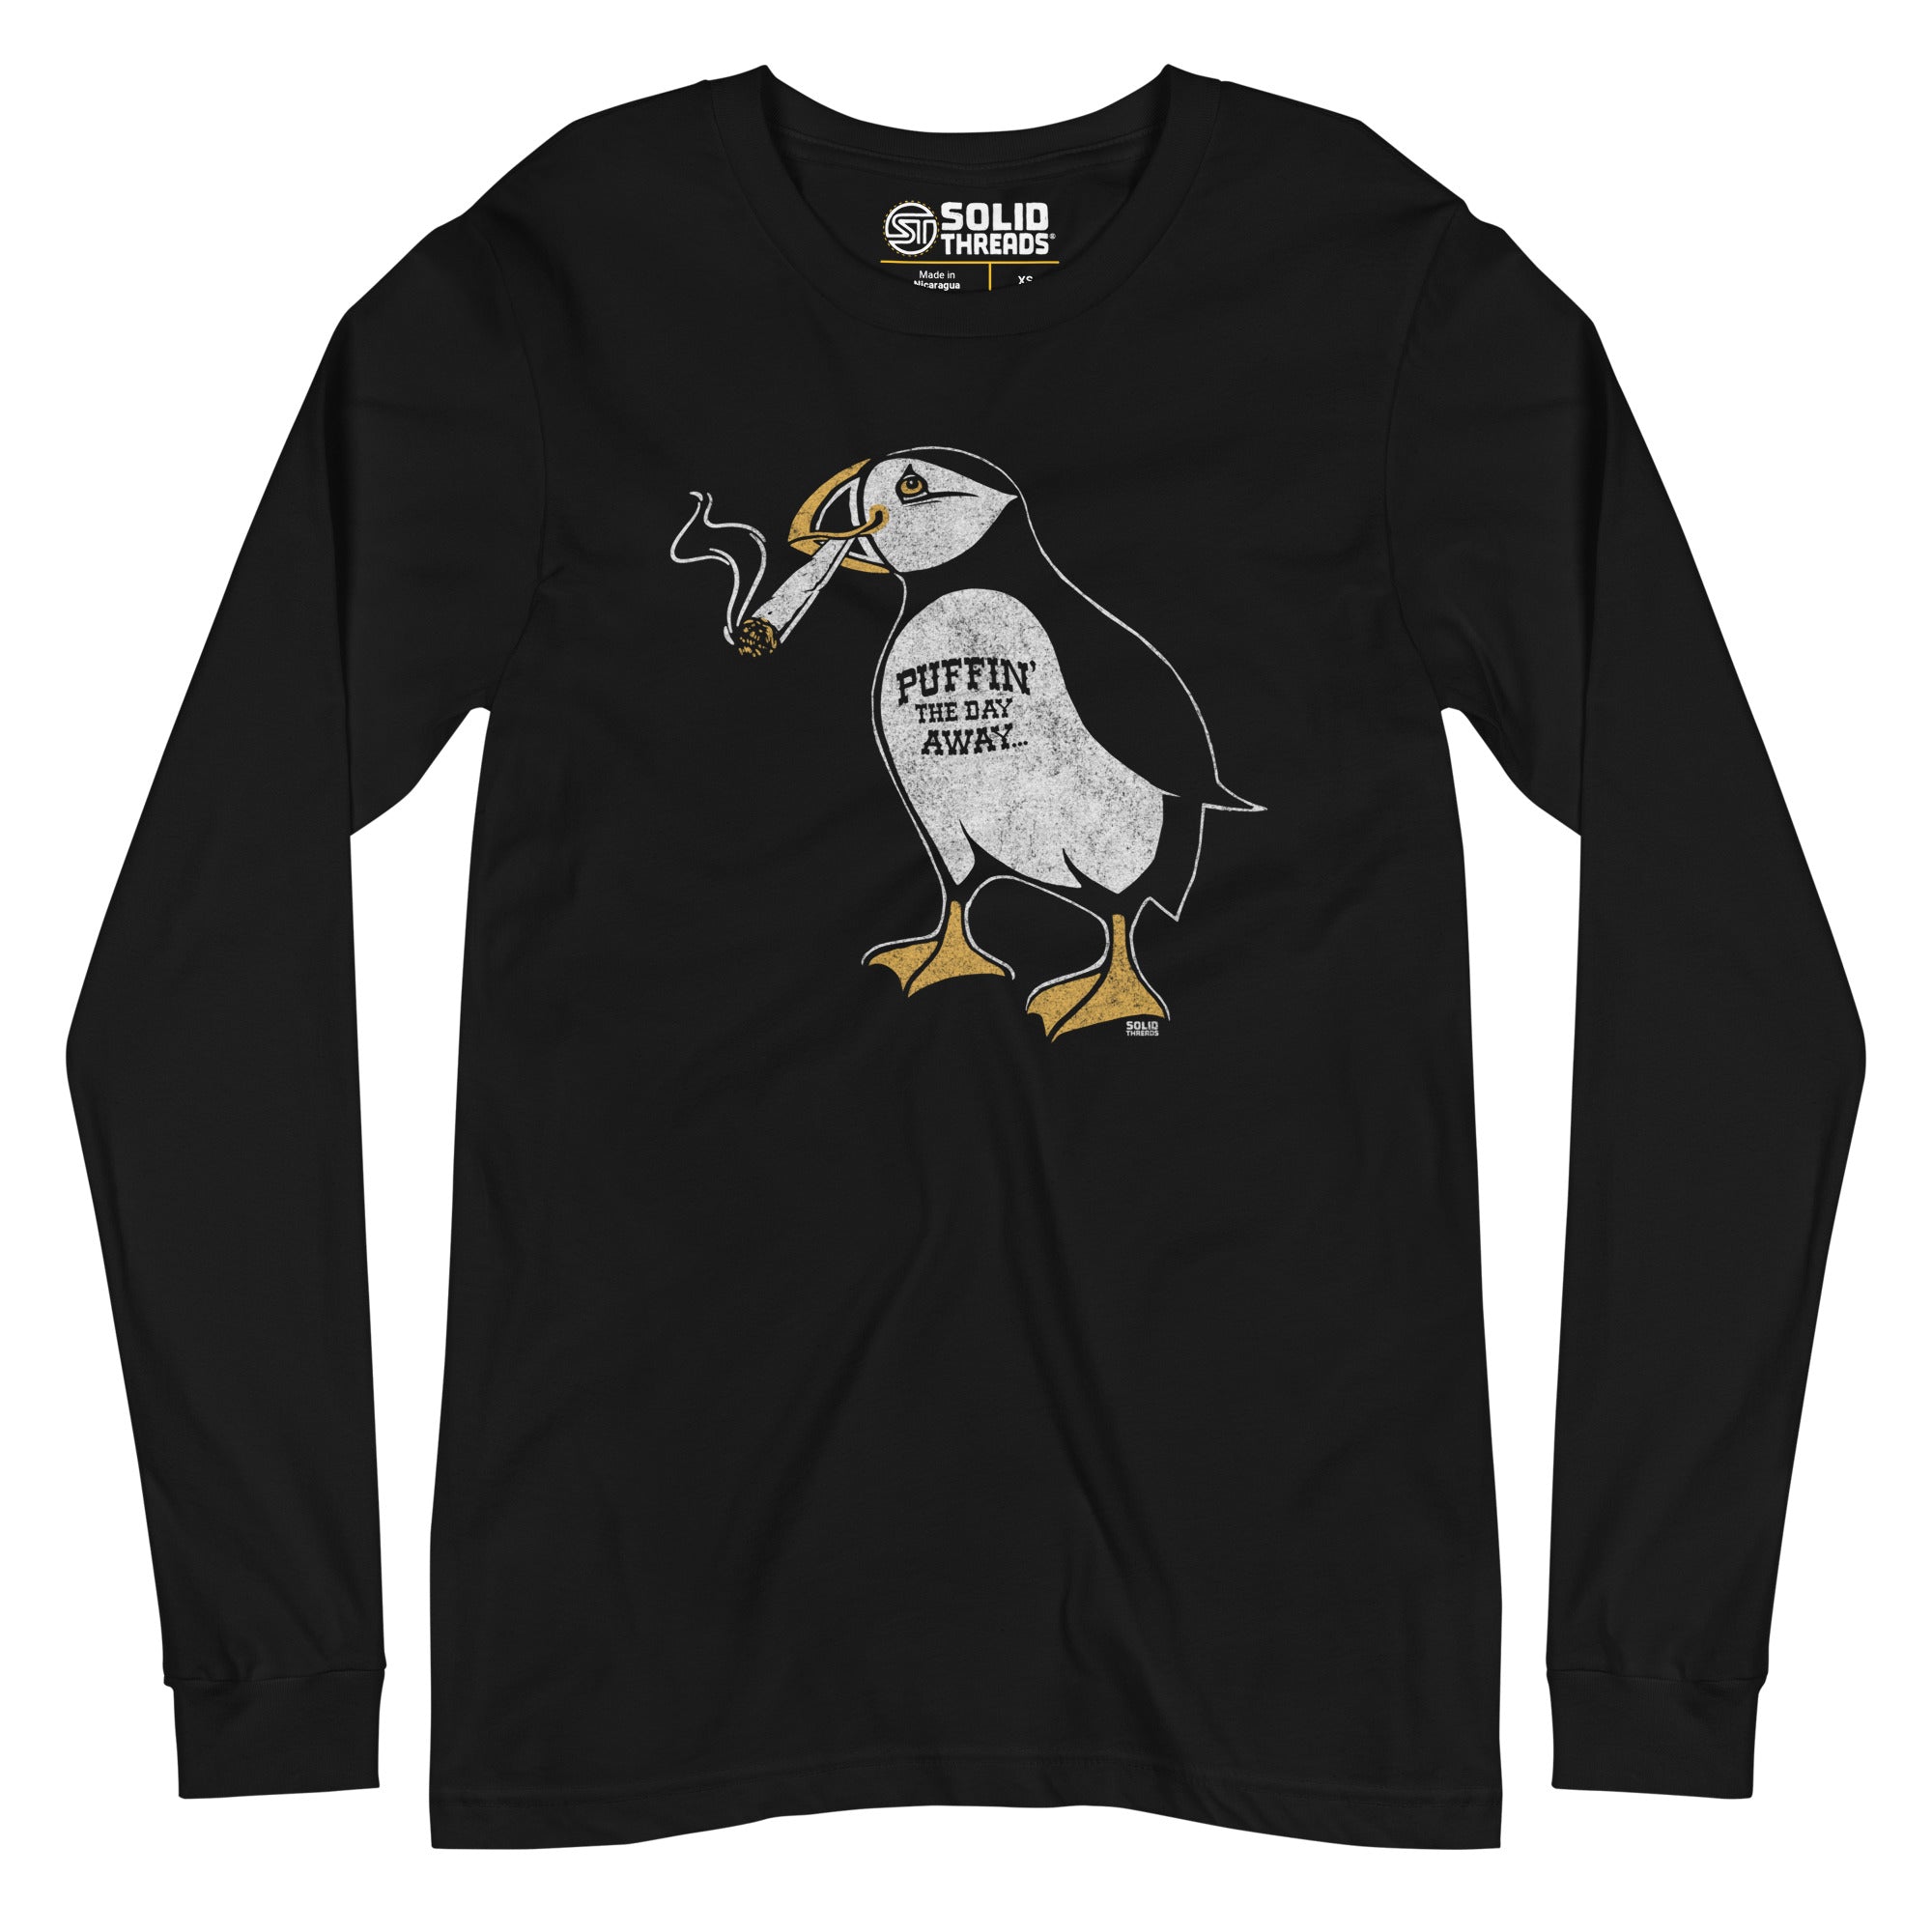 Unisex Puffin Away Vintage Long Sleeve T Shirt | Funny Marijuana Graphic Tee | Solid Threads